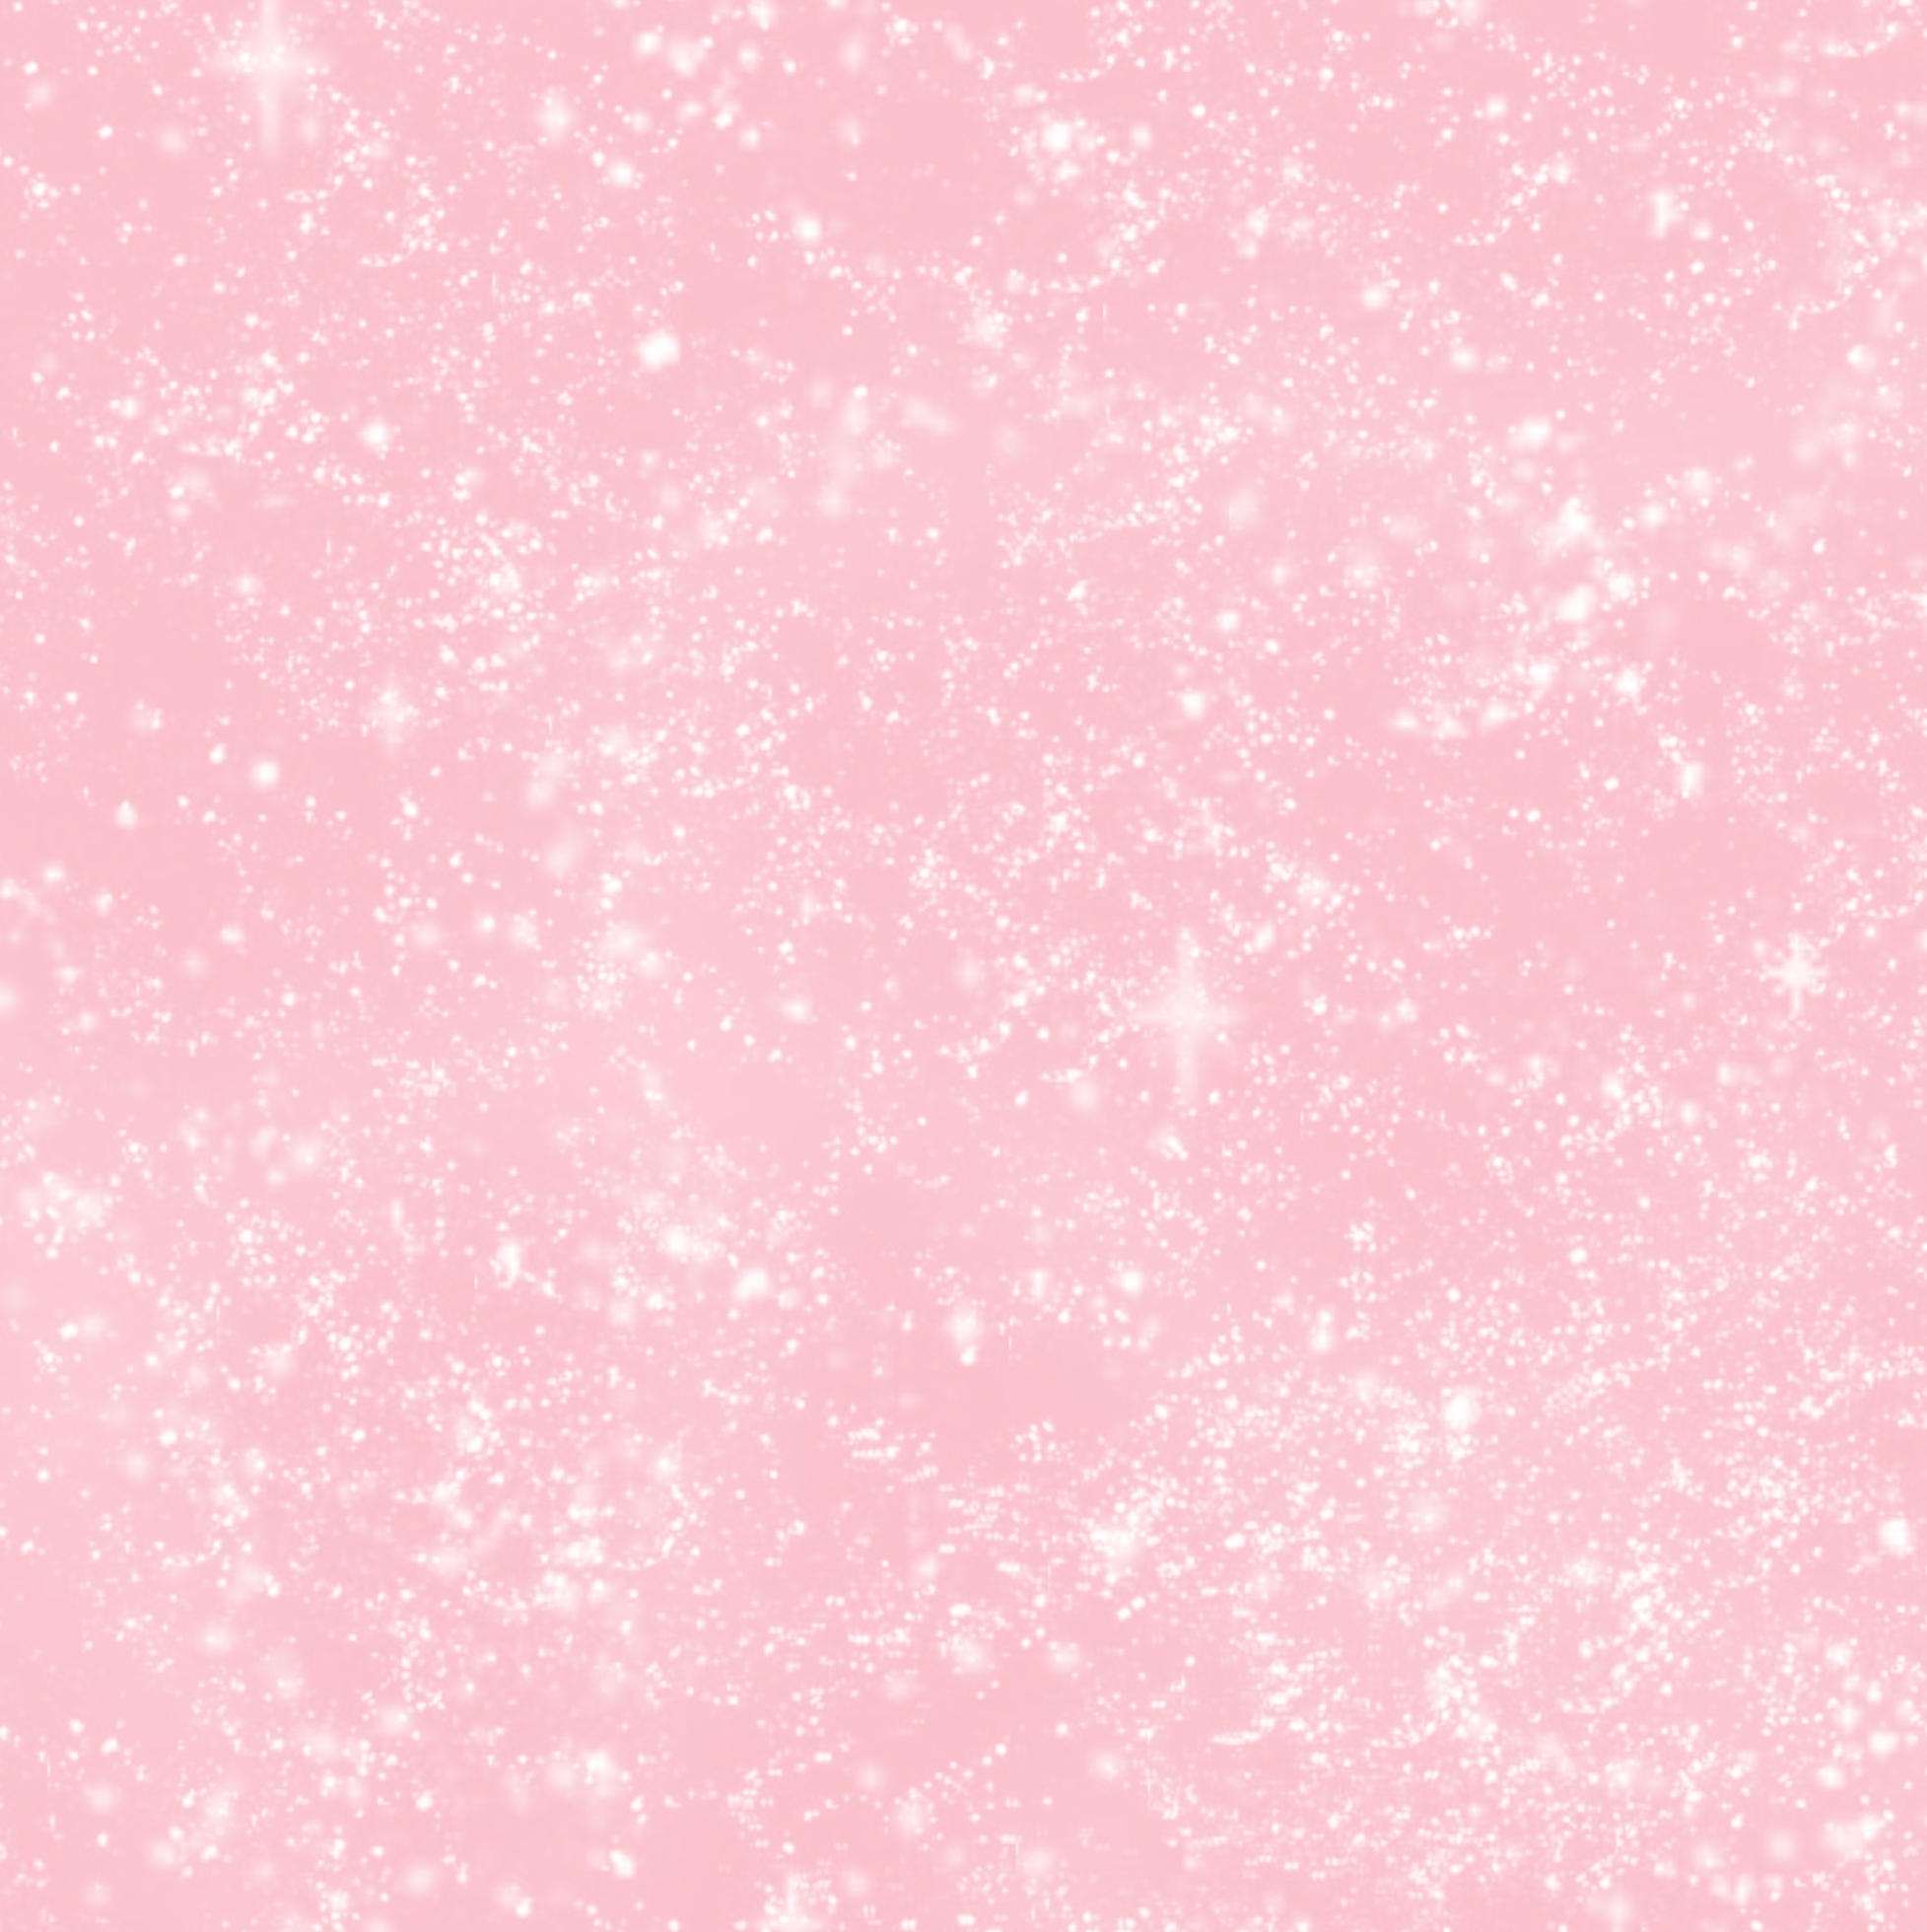 Pink Wallpapers tumblr   HD Wallpapers 1955x1960